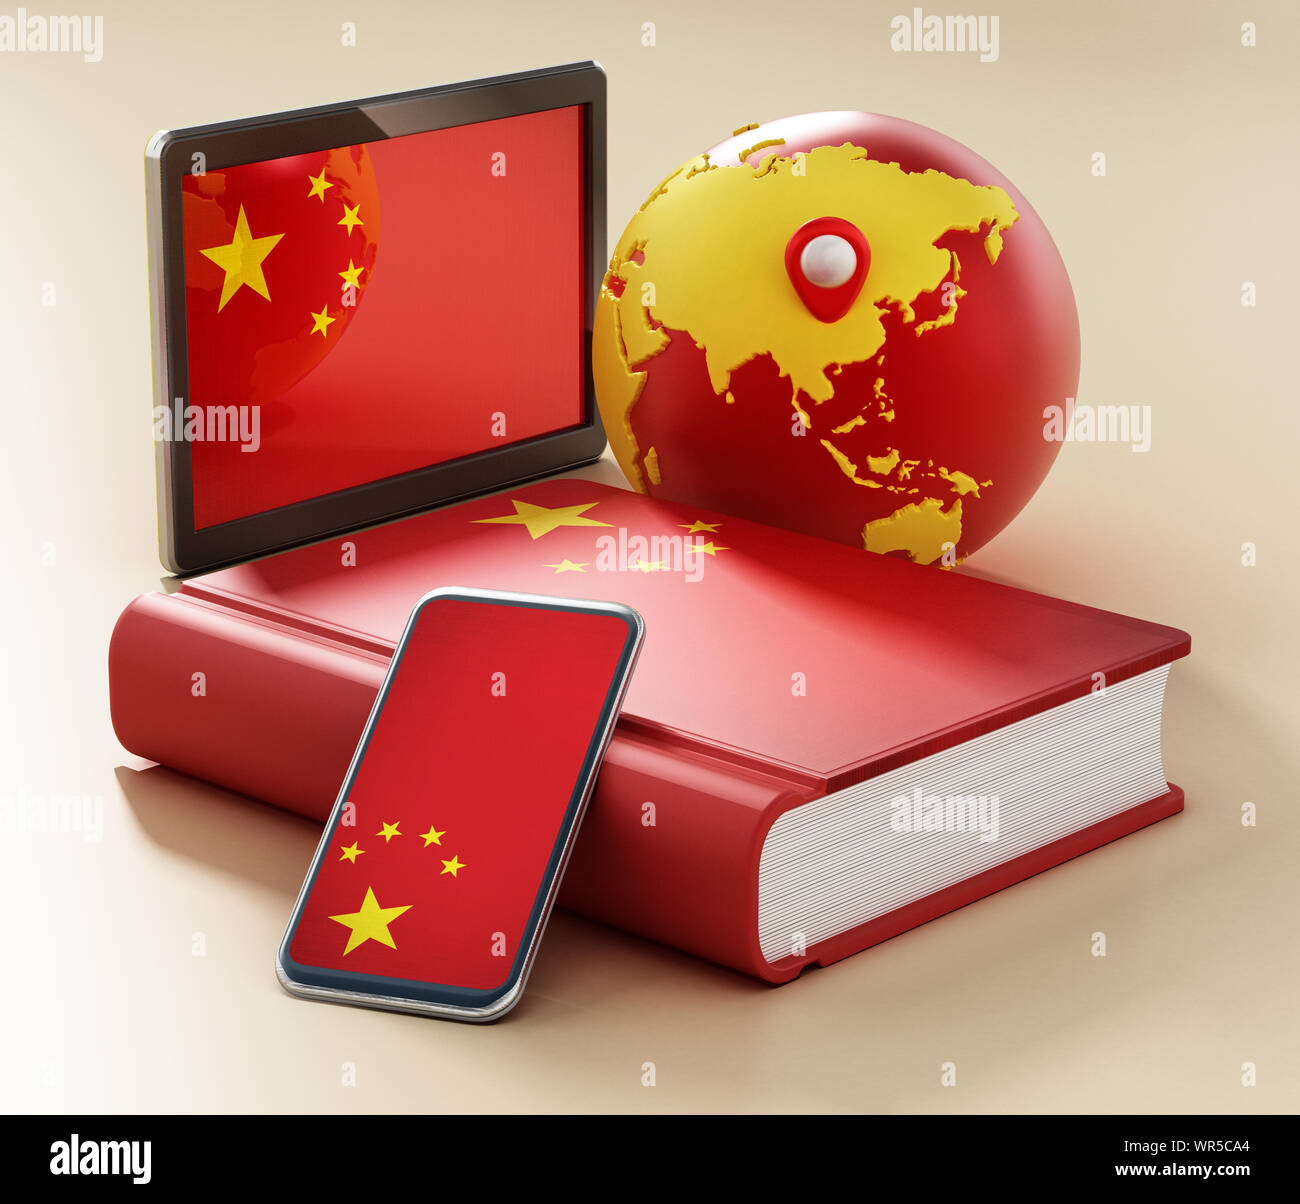 Dictionary, smartphone and tablet pc with China flag along the globe. 3D illustration. Stock Photo